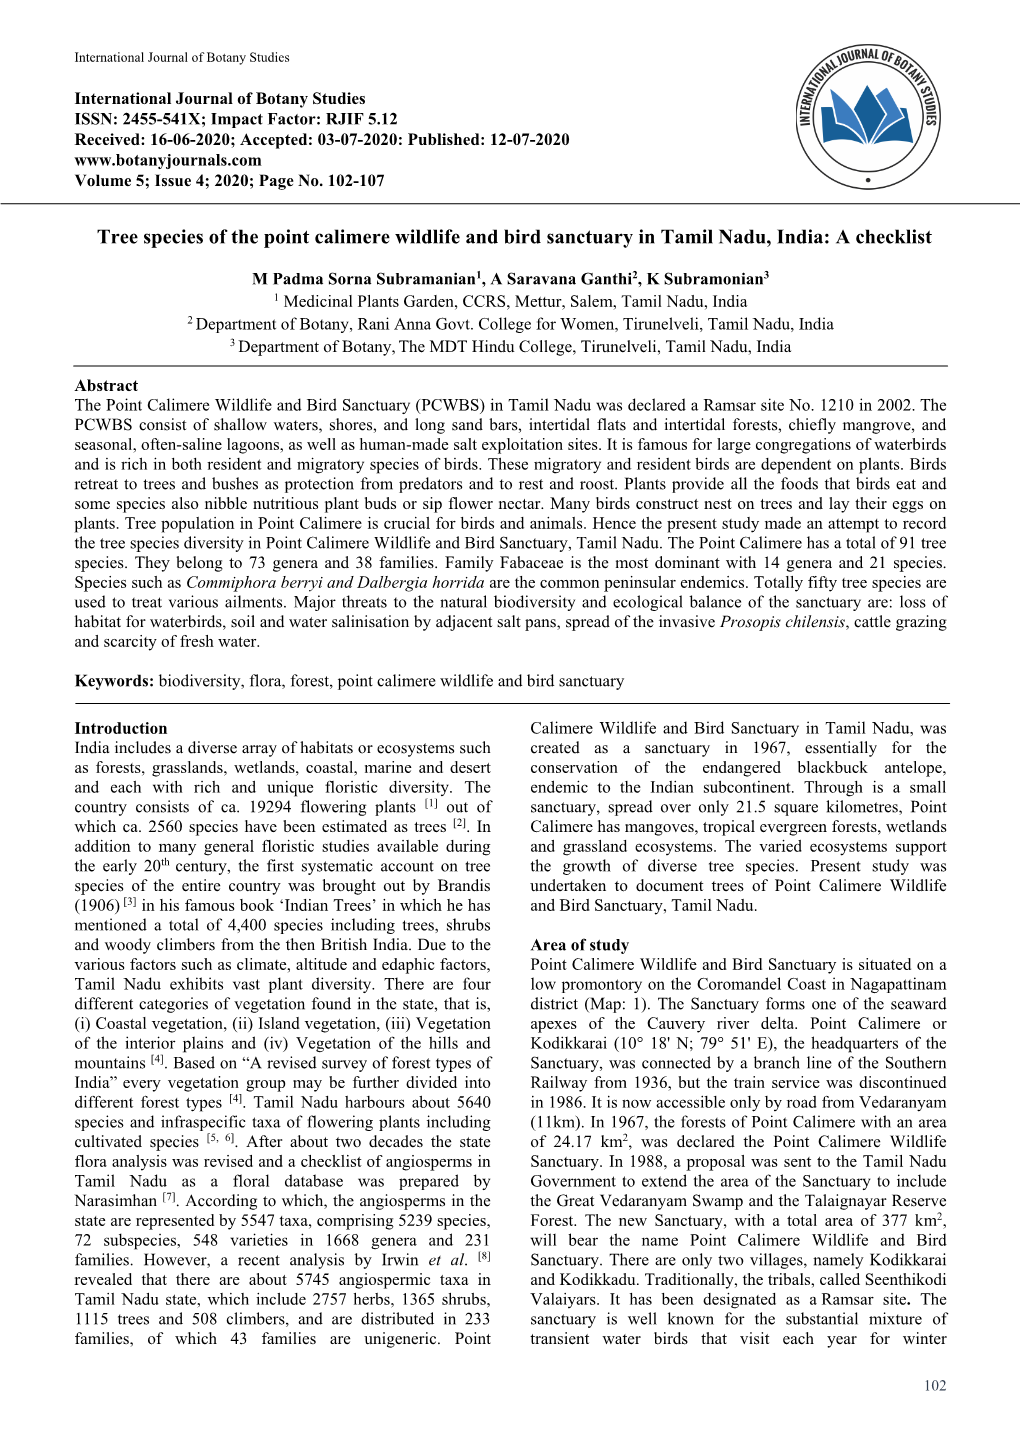 Tree Species of the Point Calimere Wildlife and Bird Sanctuary in Tamil Nadu, India: a Checklist